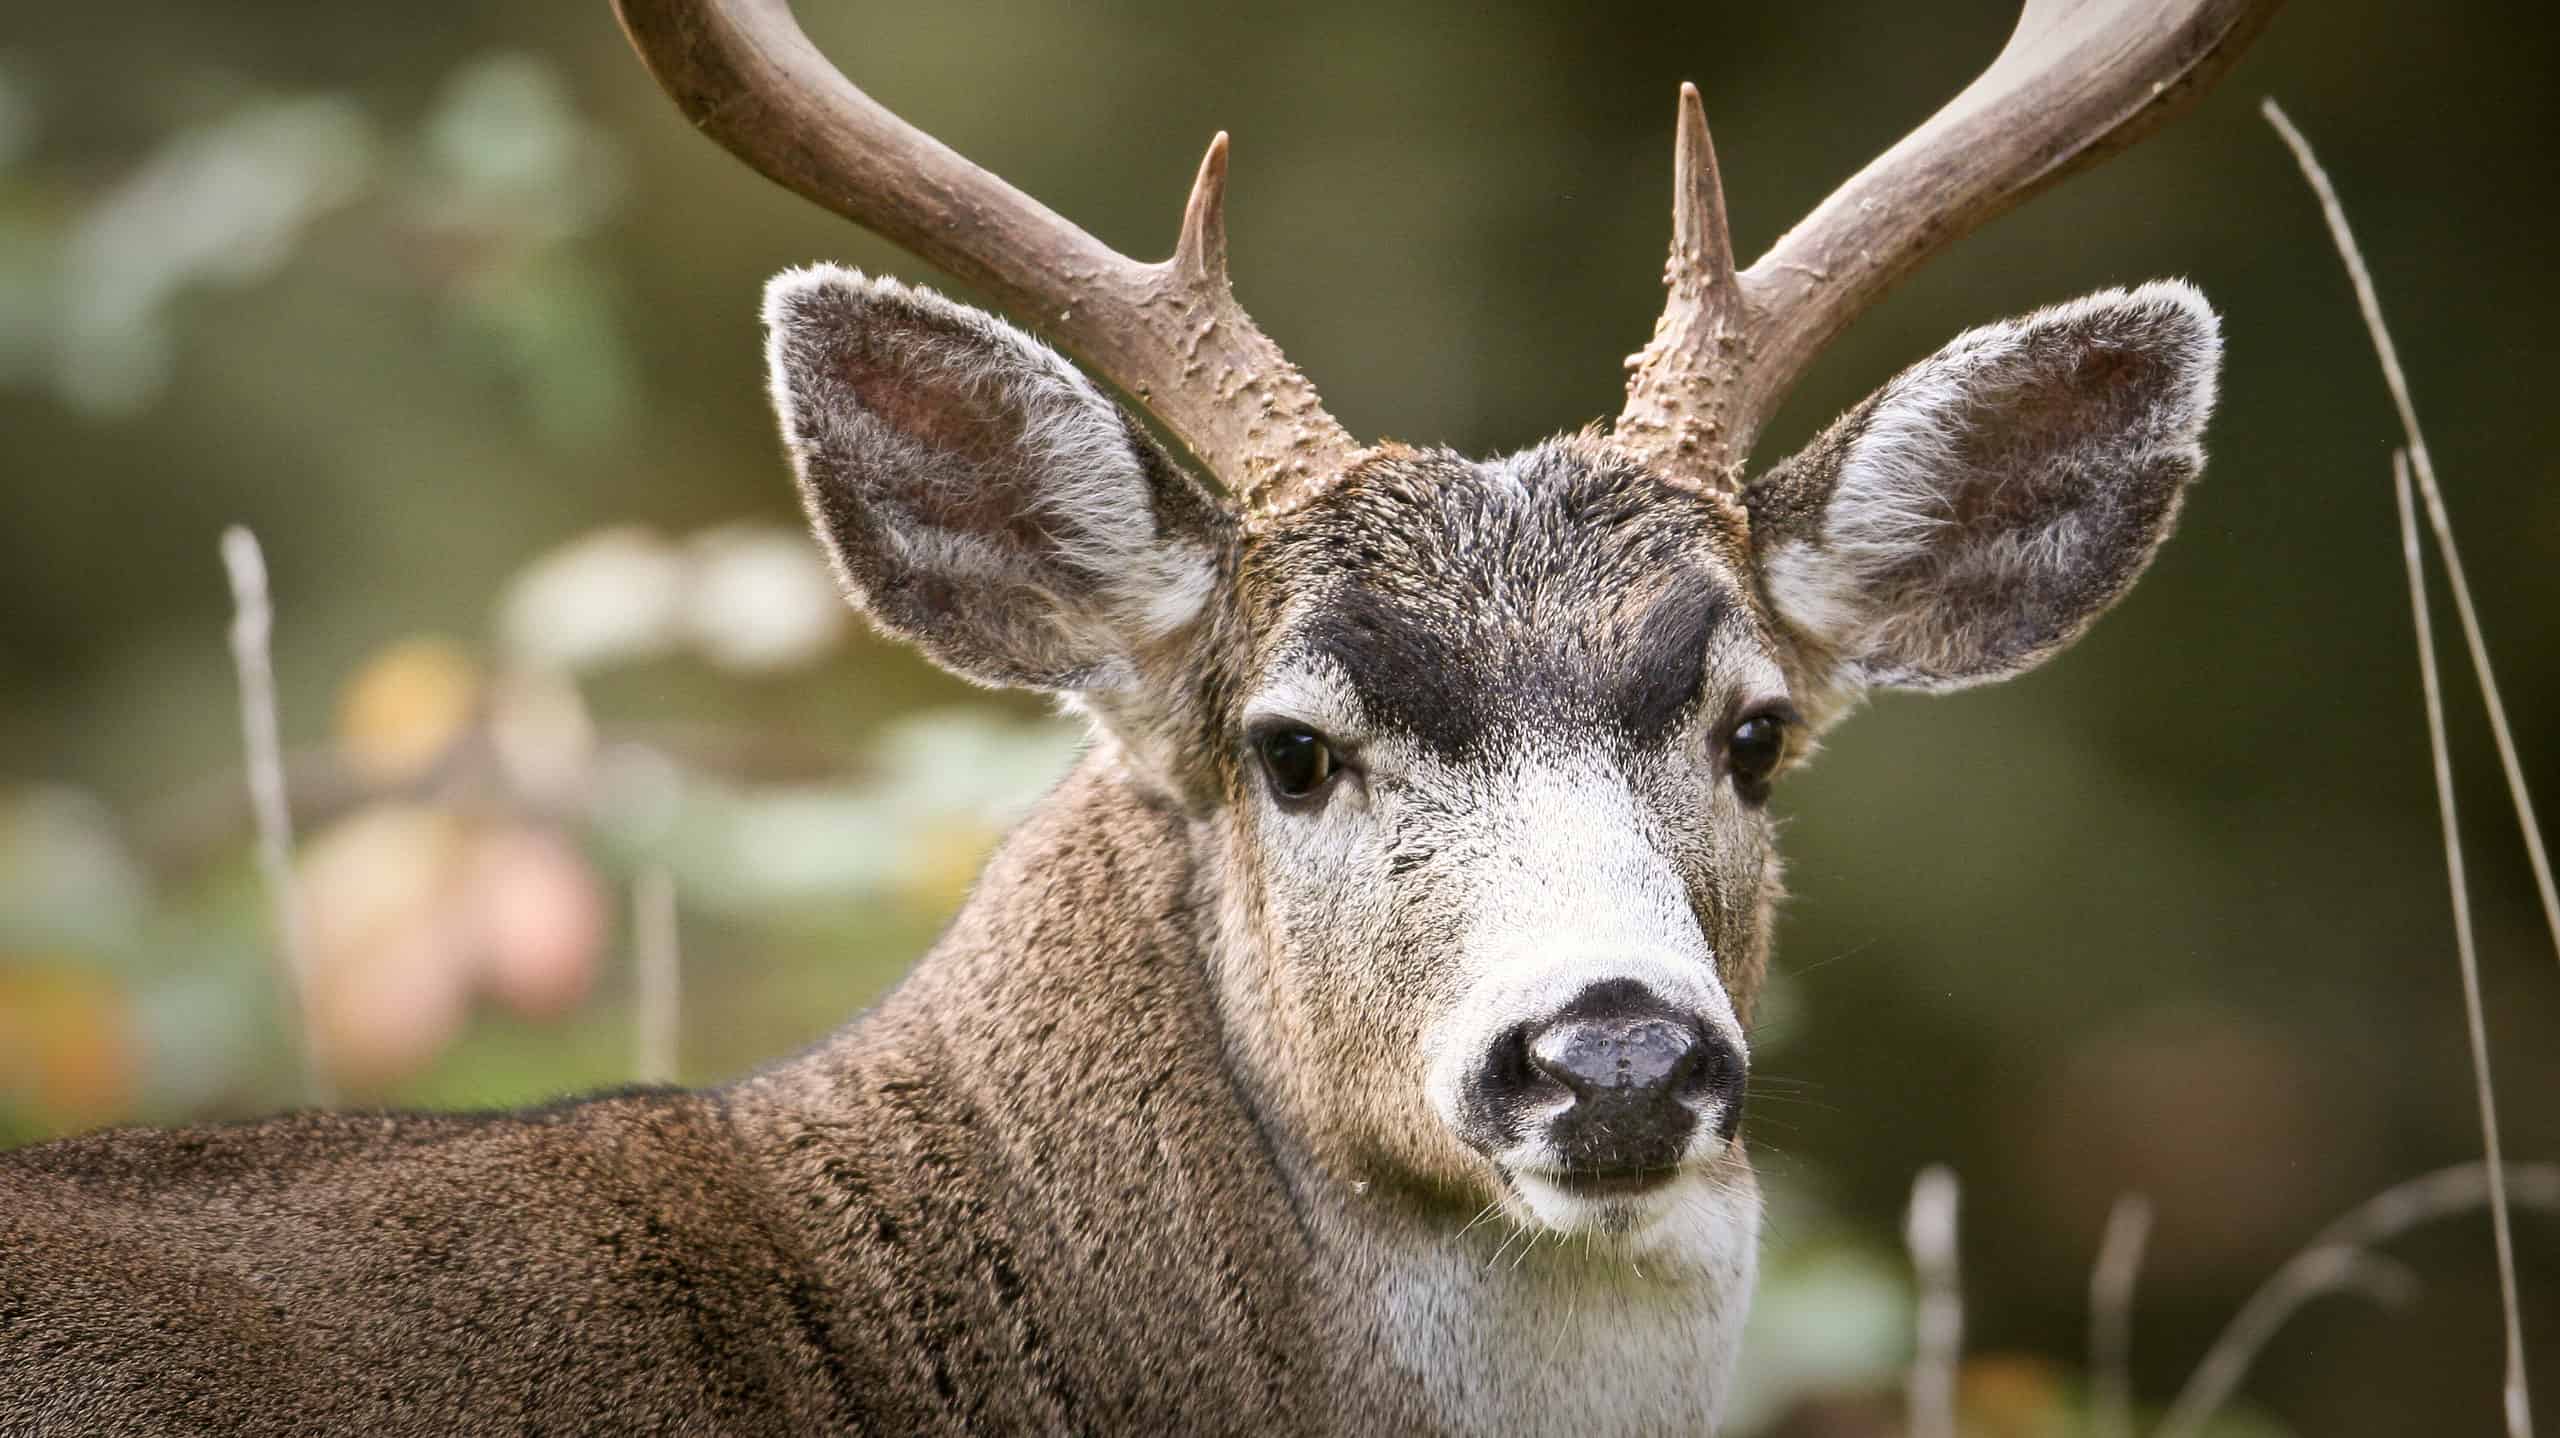 Discover The Largest Blacktail Deer Ever Caught in Alaska - AZ Animals